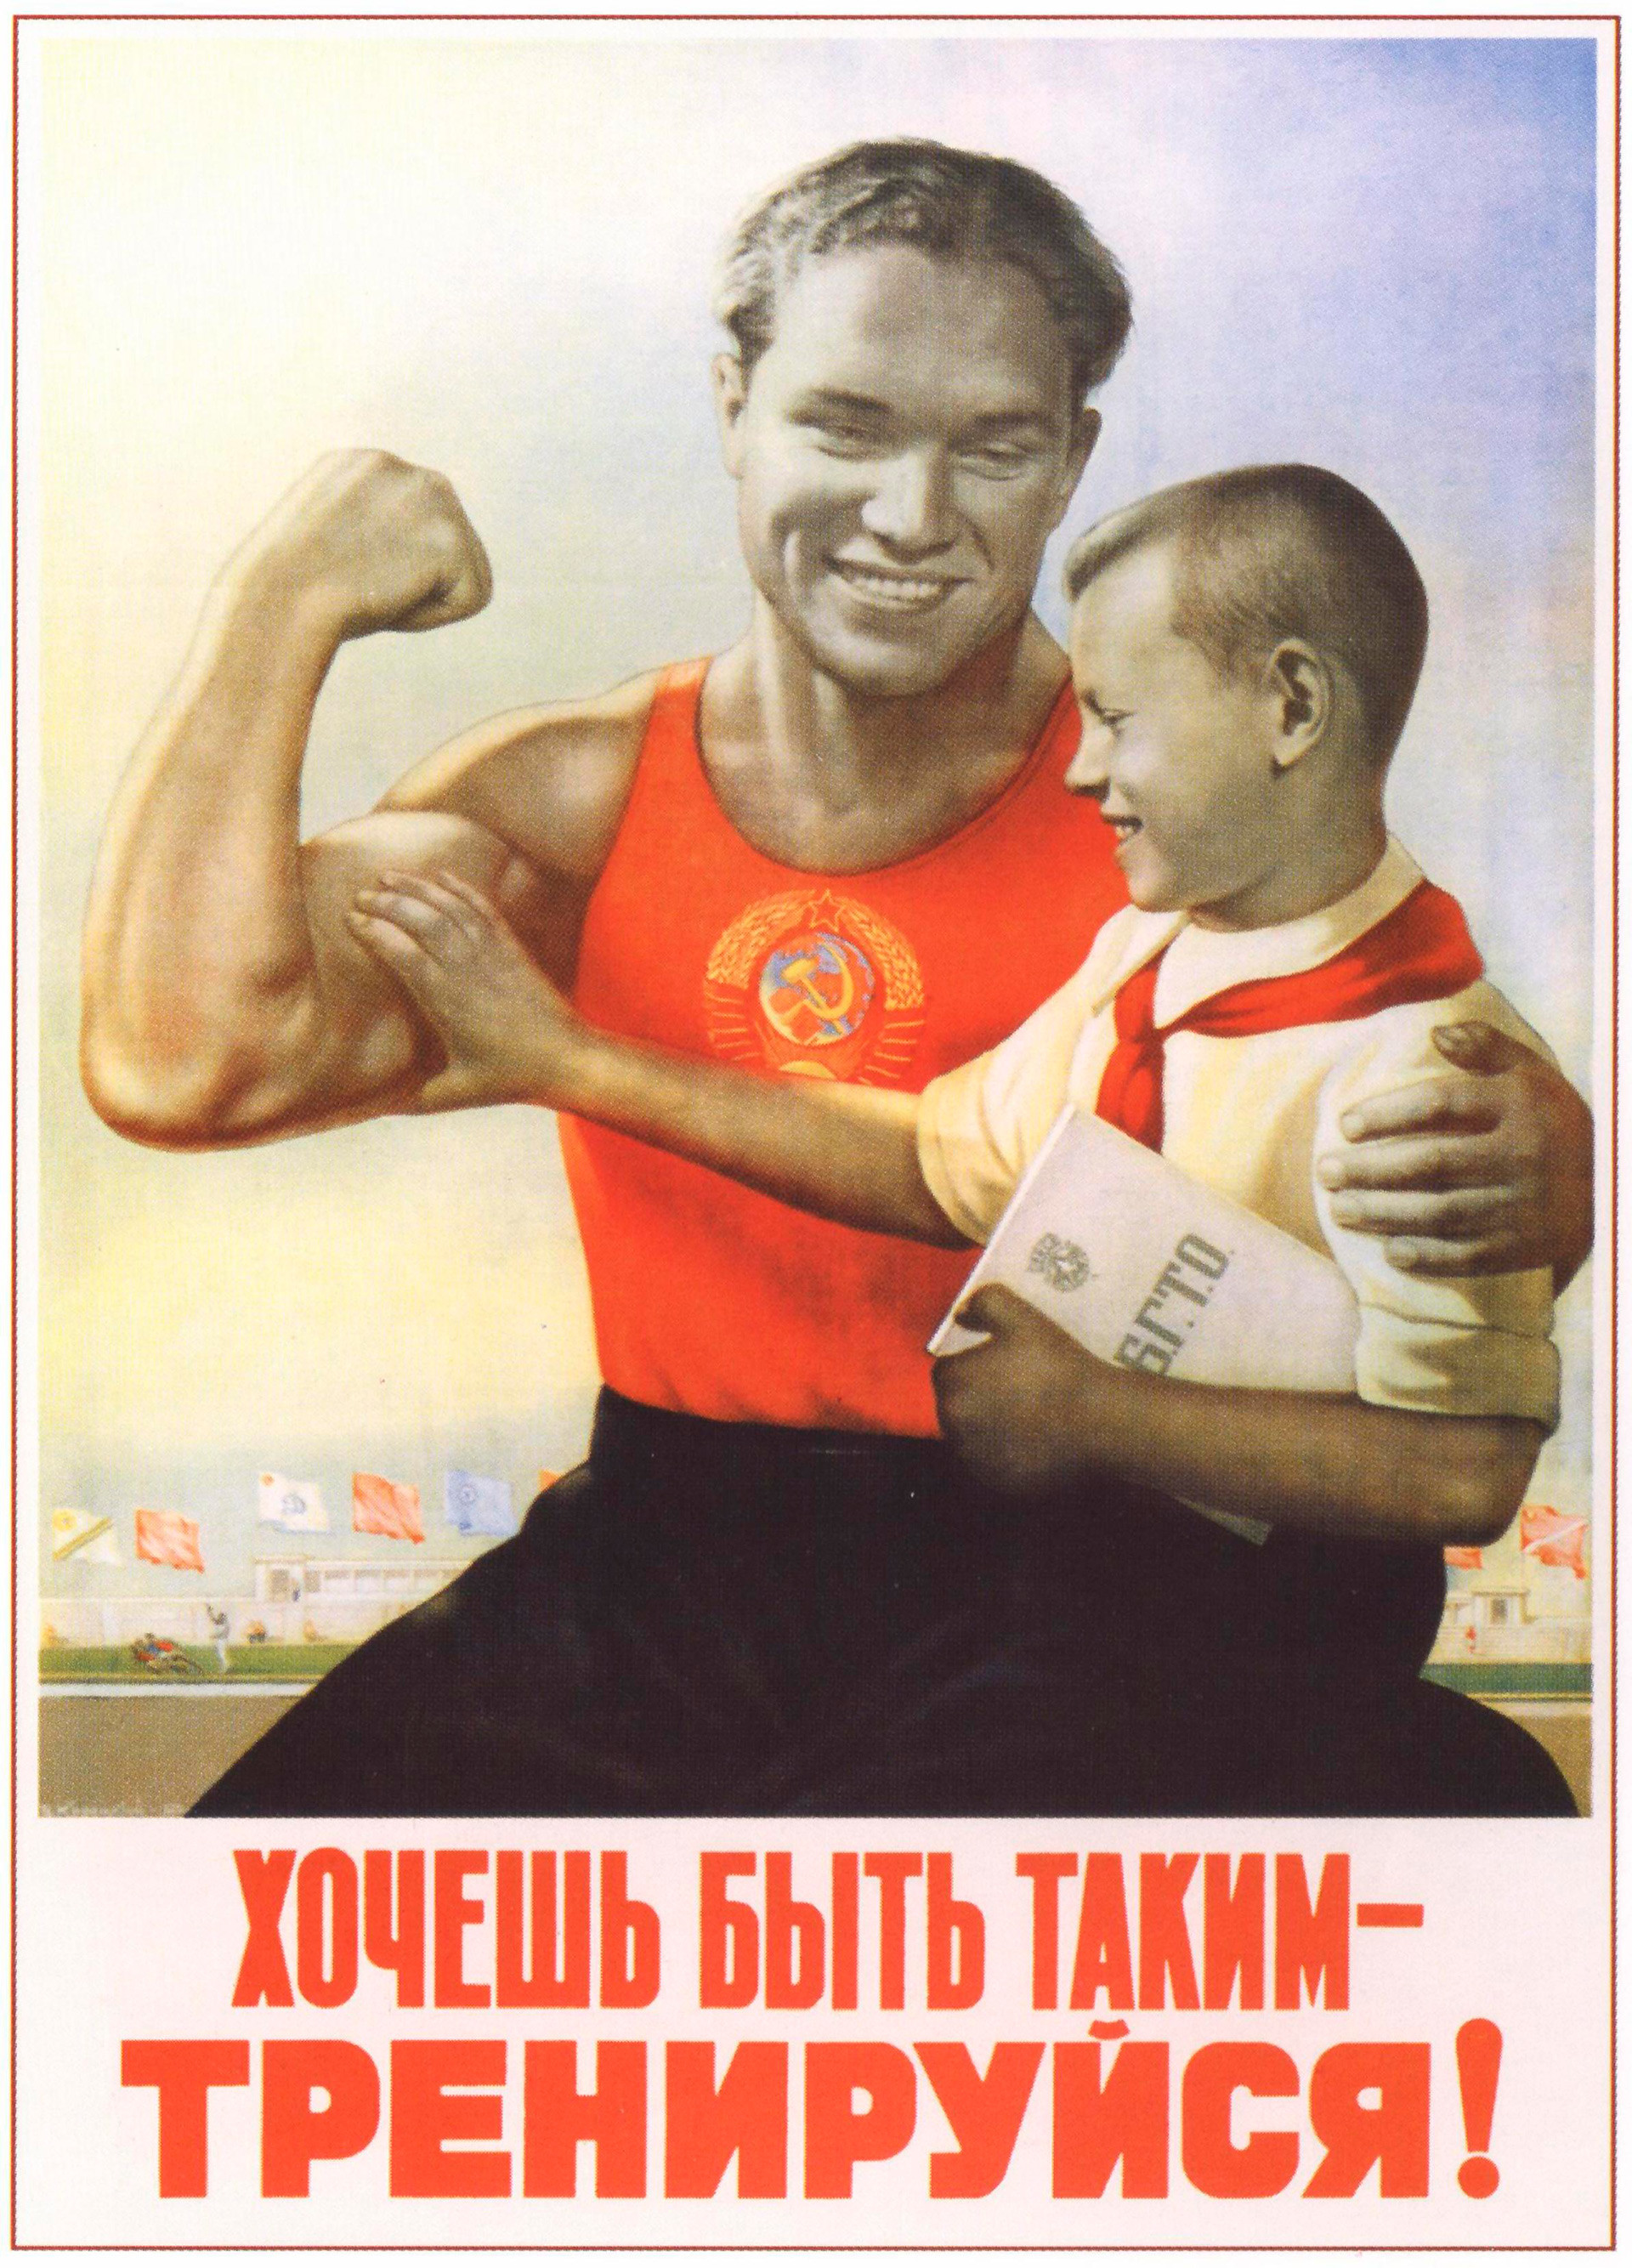 Soviet Sports Weight Lifting  Vintage Advertising Poster reproduction